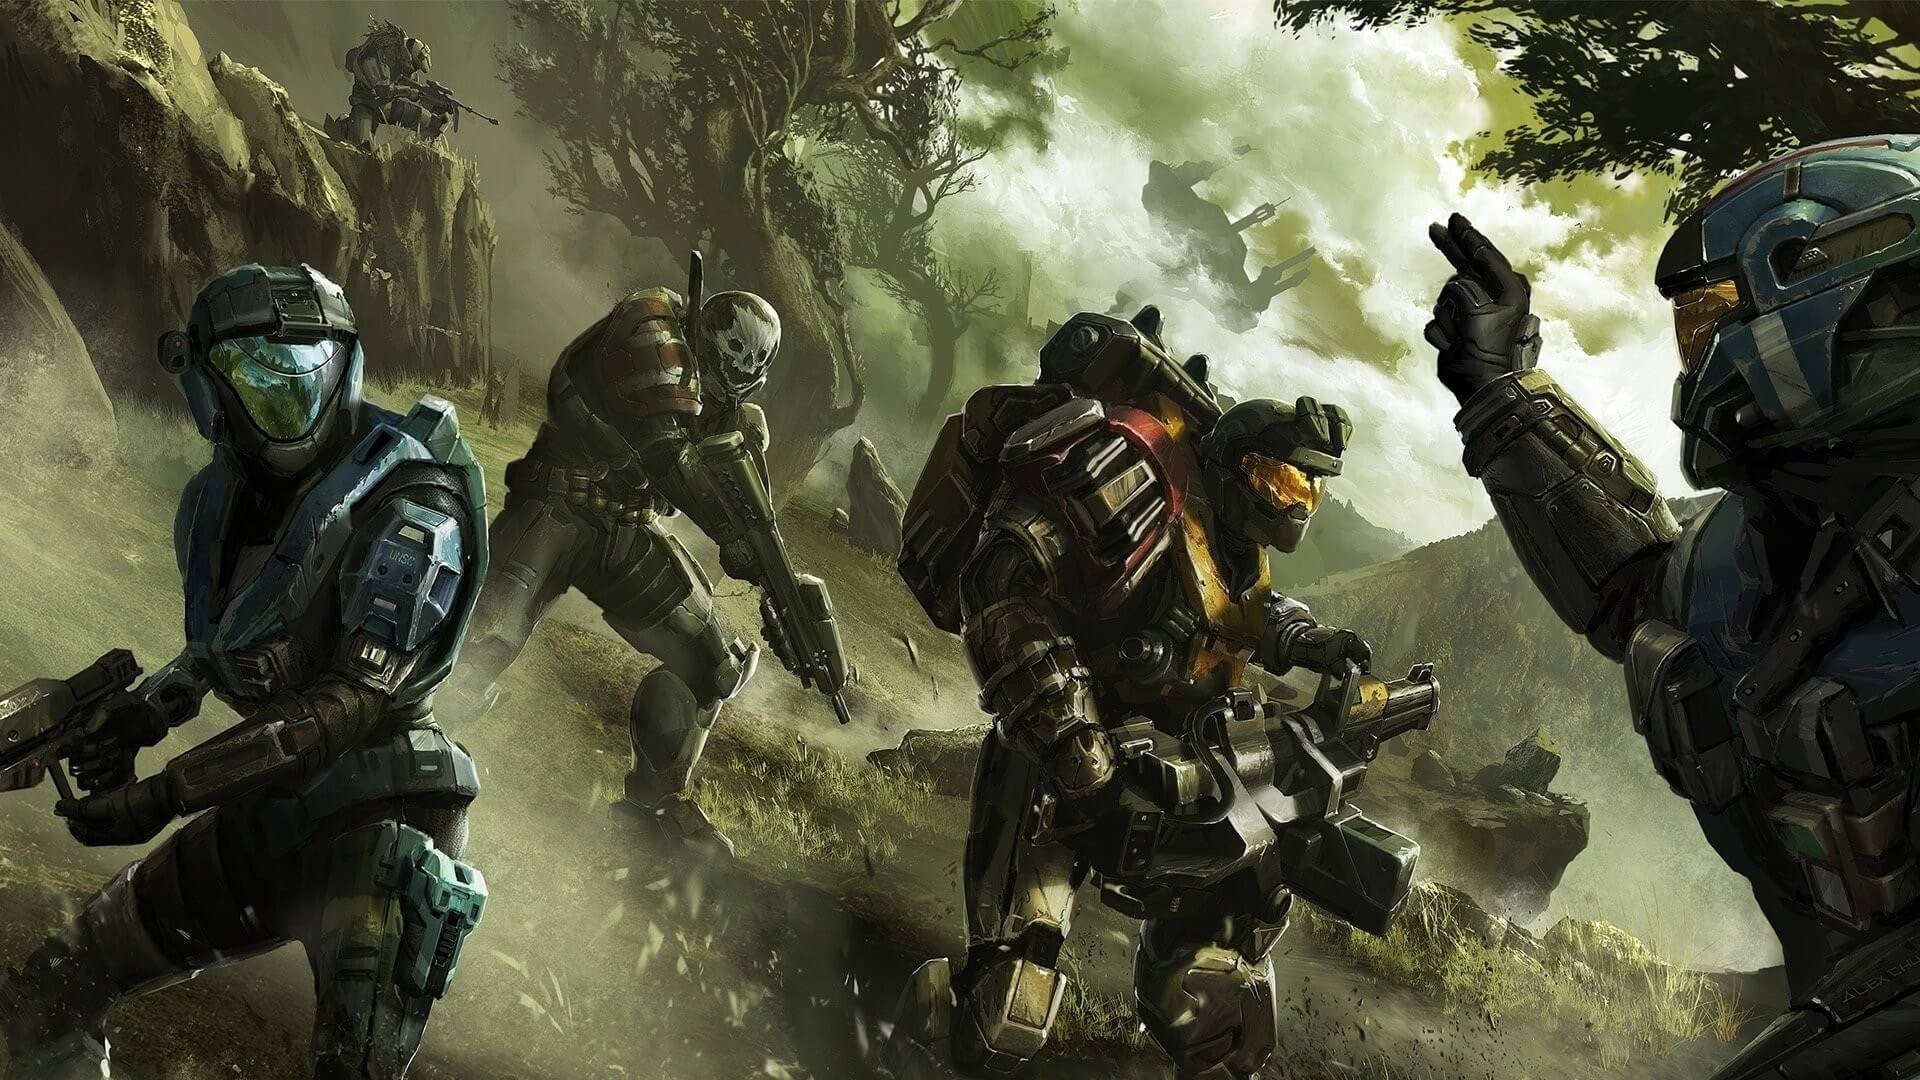 Halo reach pc specs halo reach system requirements 343 industries steam